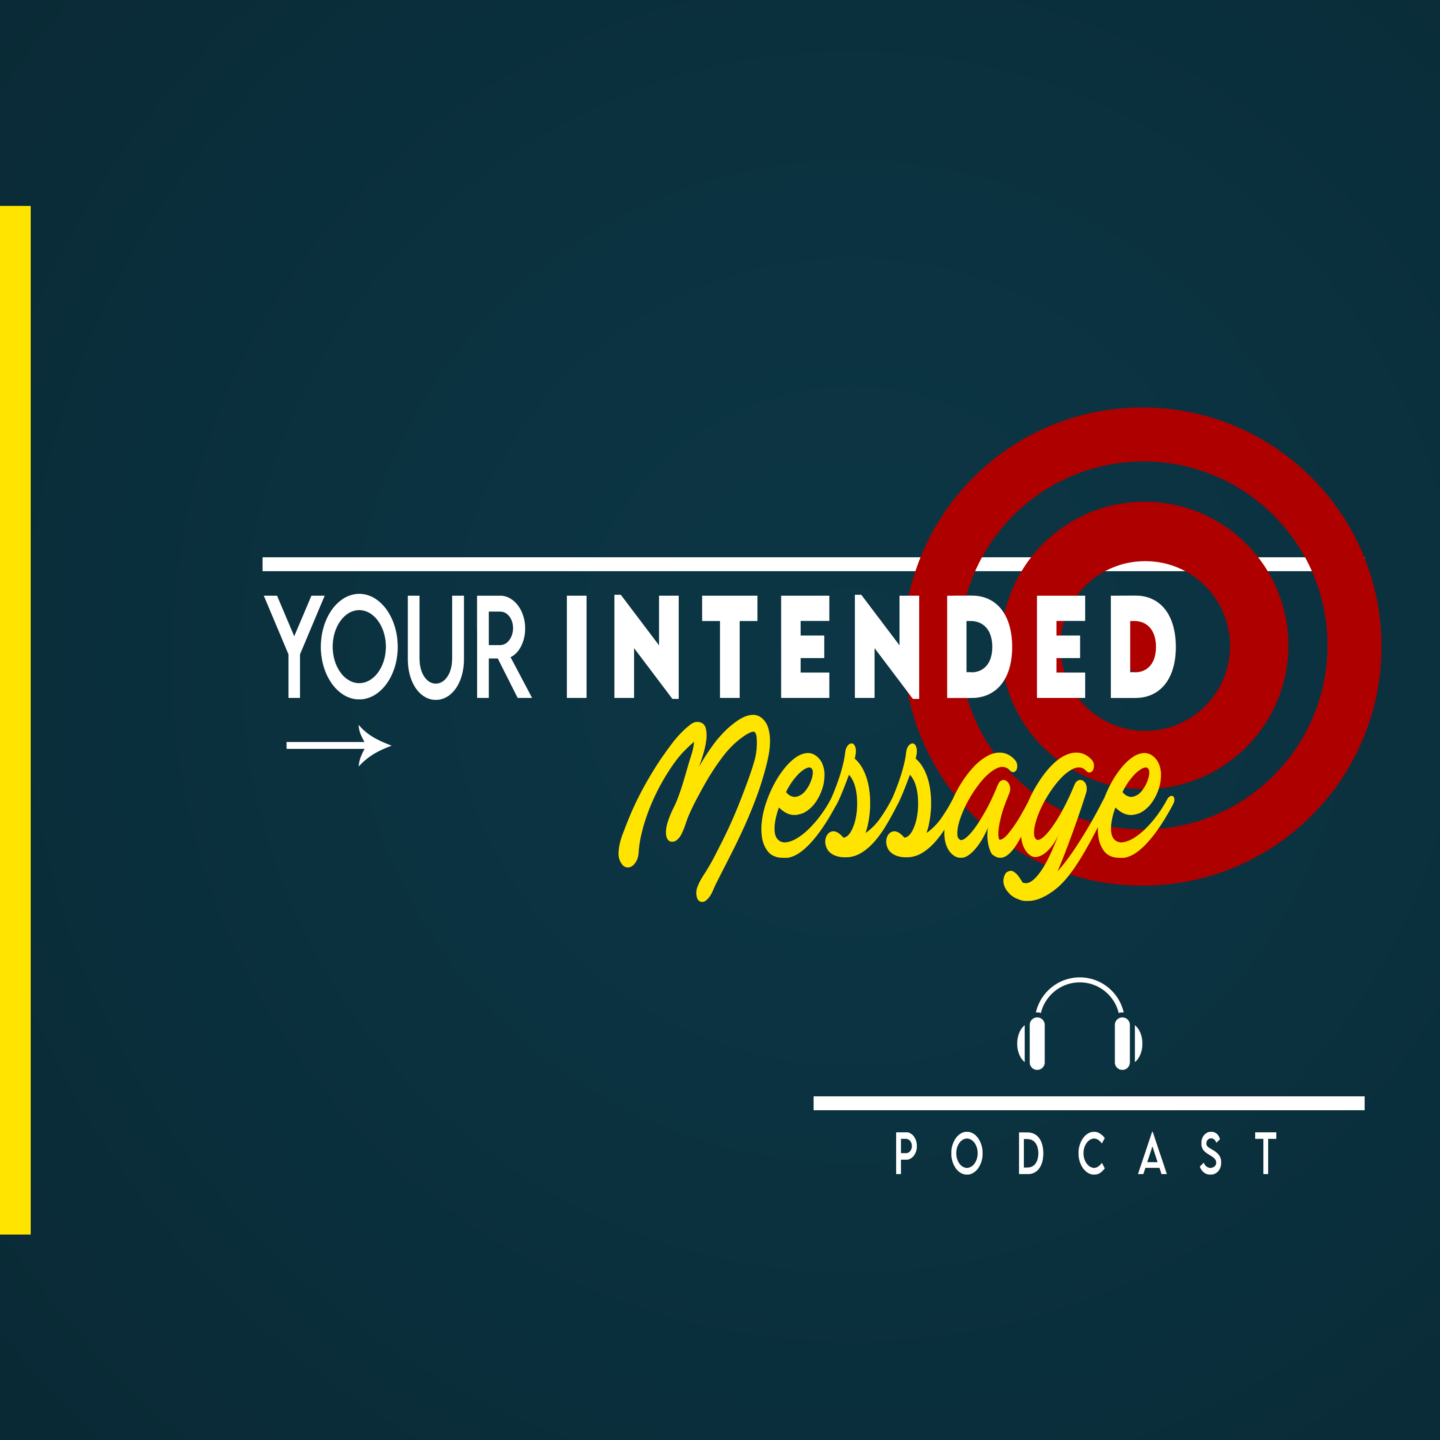 Your Intended Message podcast